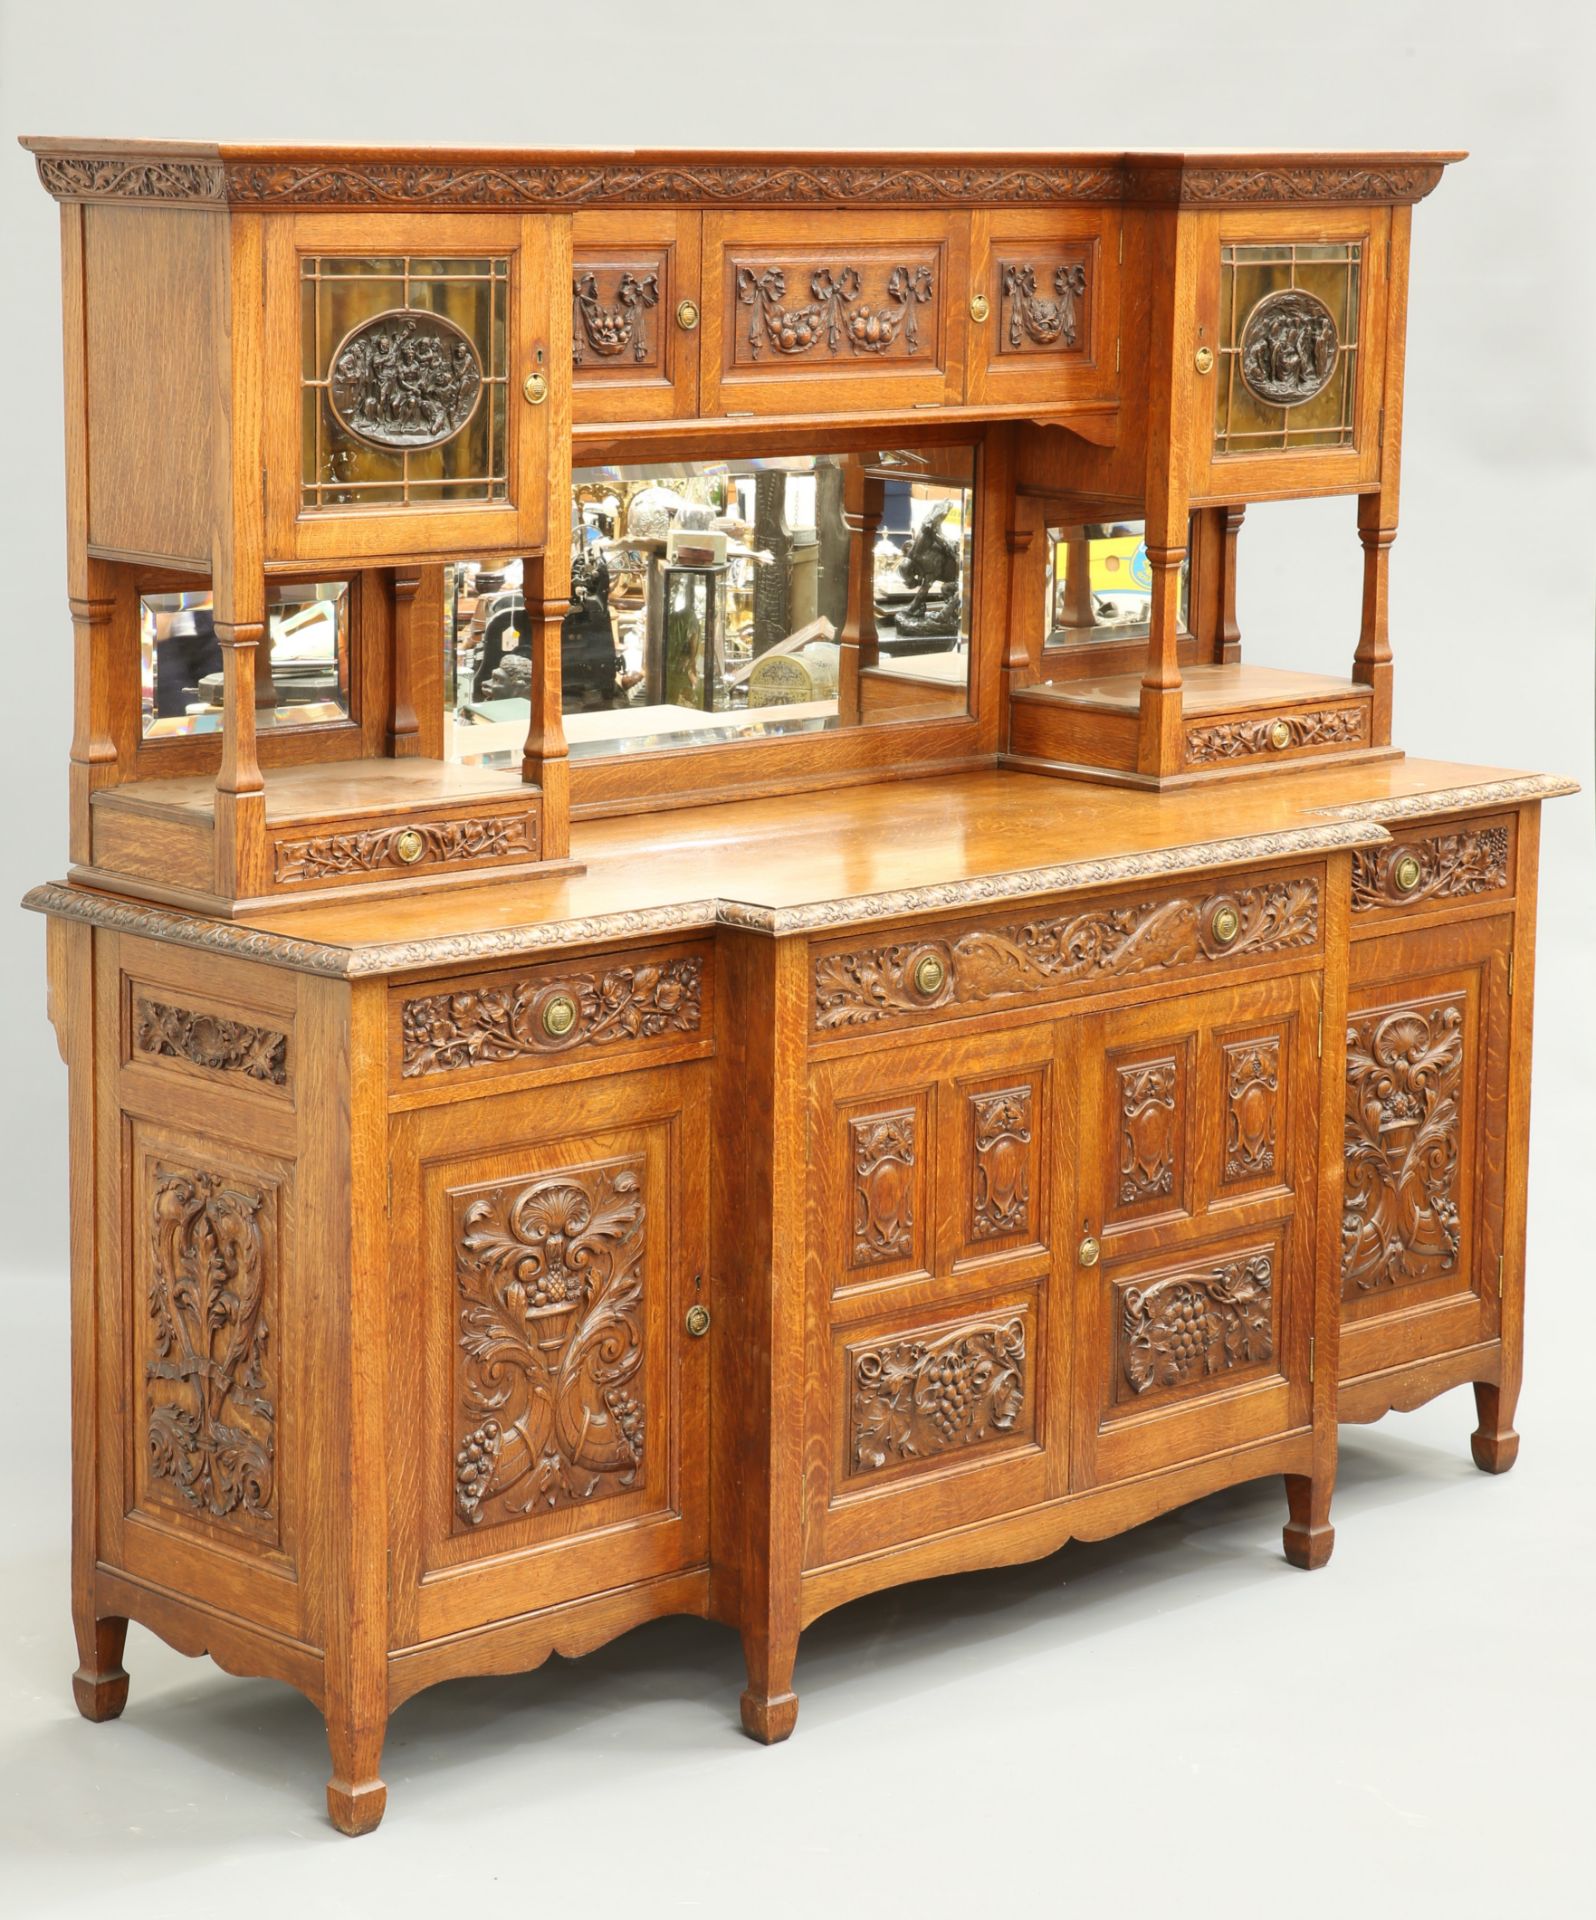 JOHN SHEARER FOR ARTHUR SIMPSON AN ARTS AND CRAFTS OAK MIRROR BACK SIDEBOARD, the superstructure